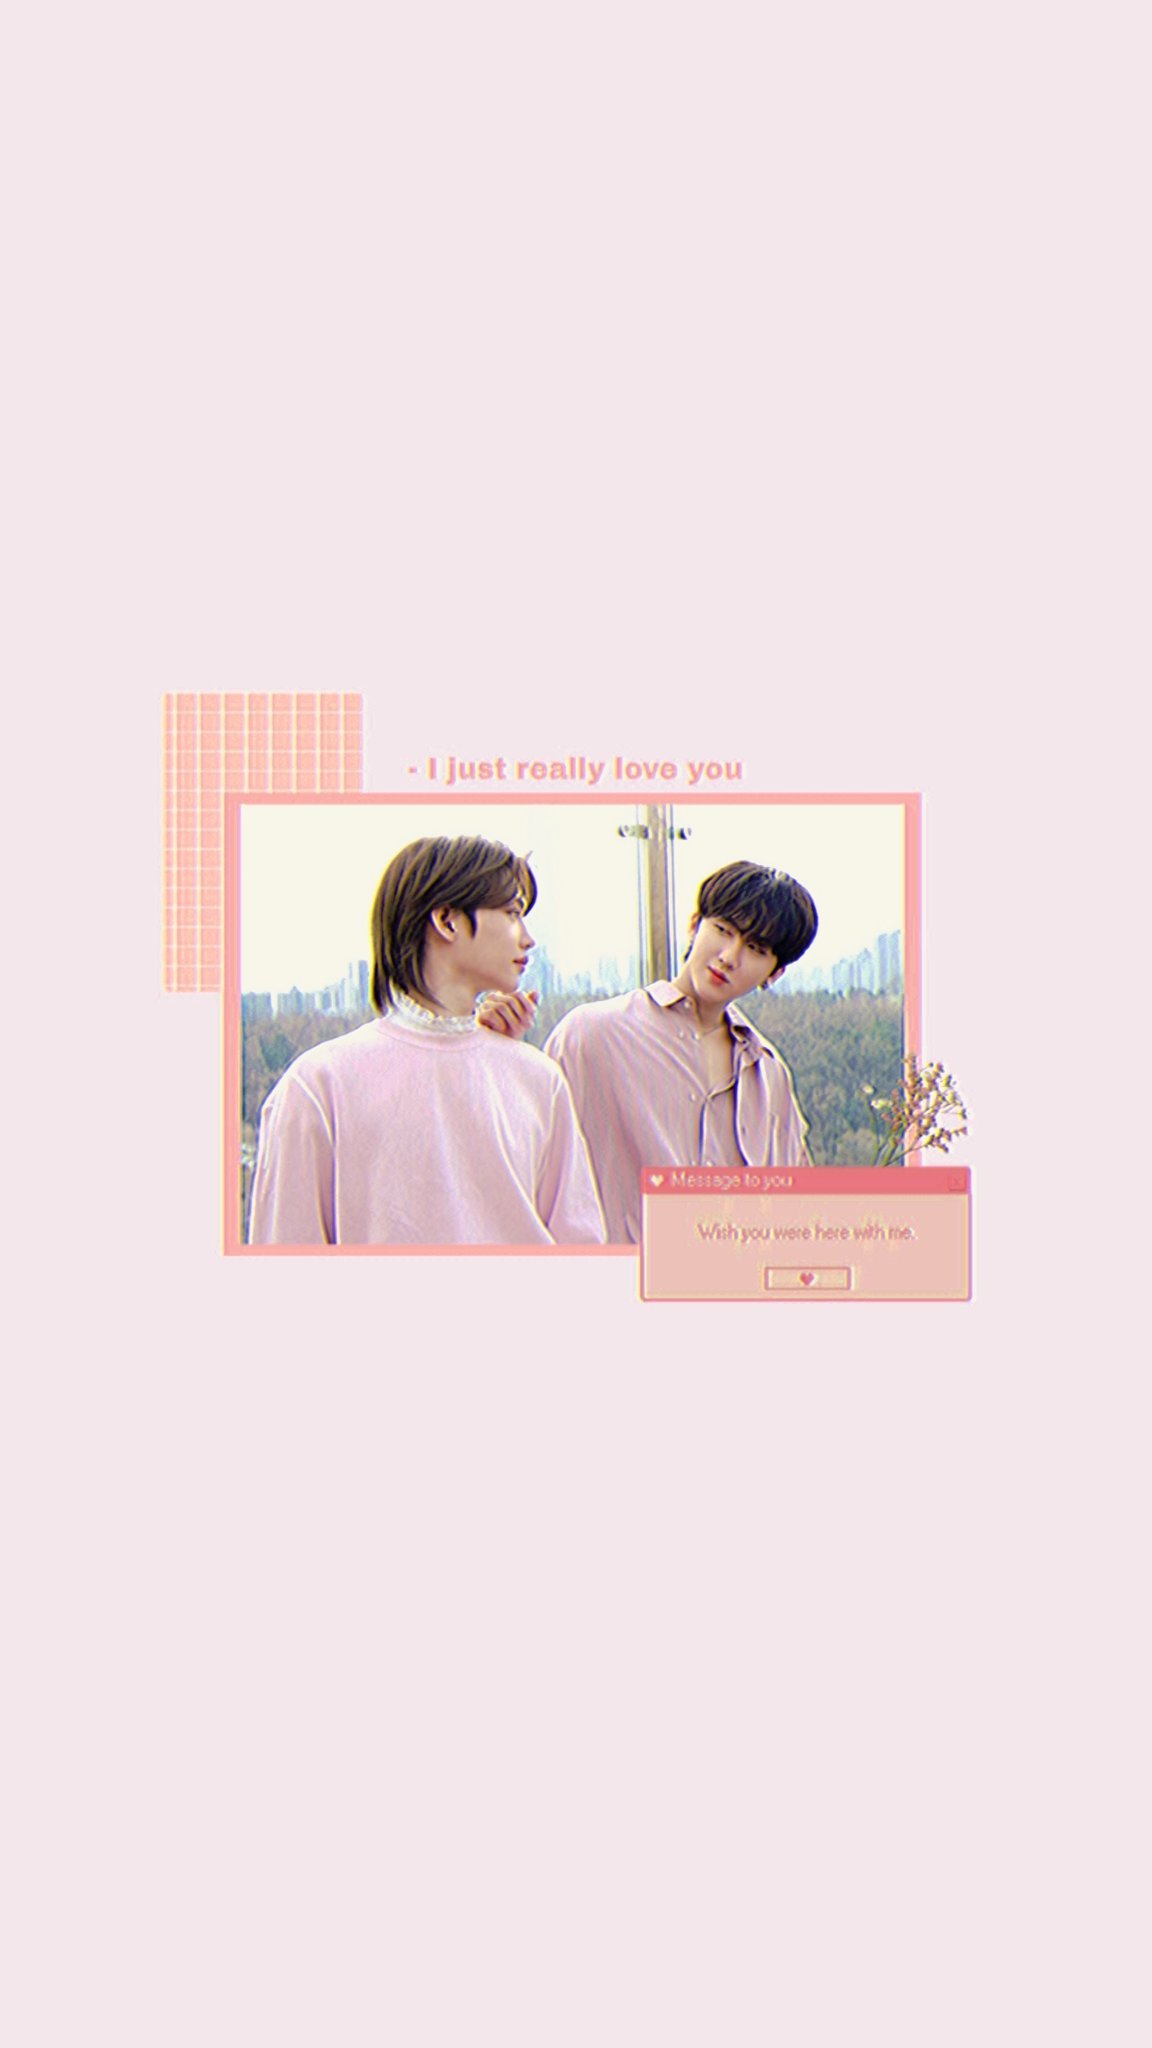 Kpop wallpaper - [✨Changbin & Felix✨] -I just really love you ↬RT if you save